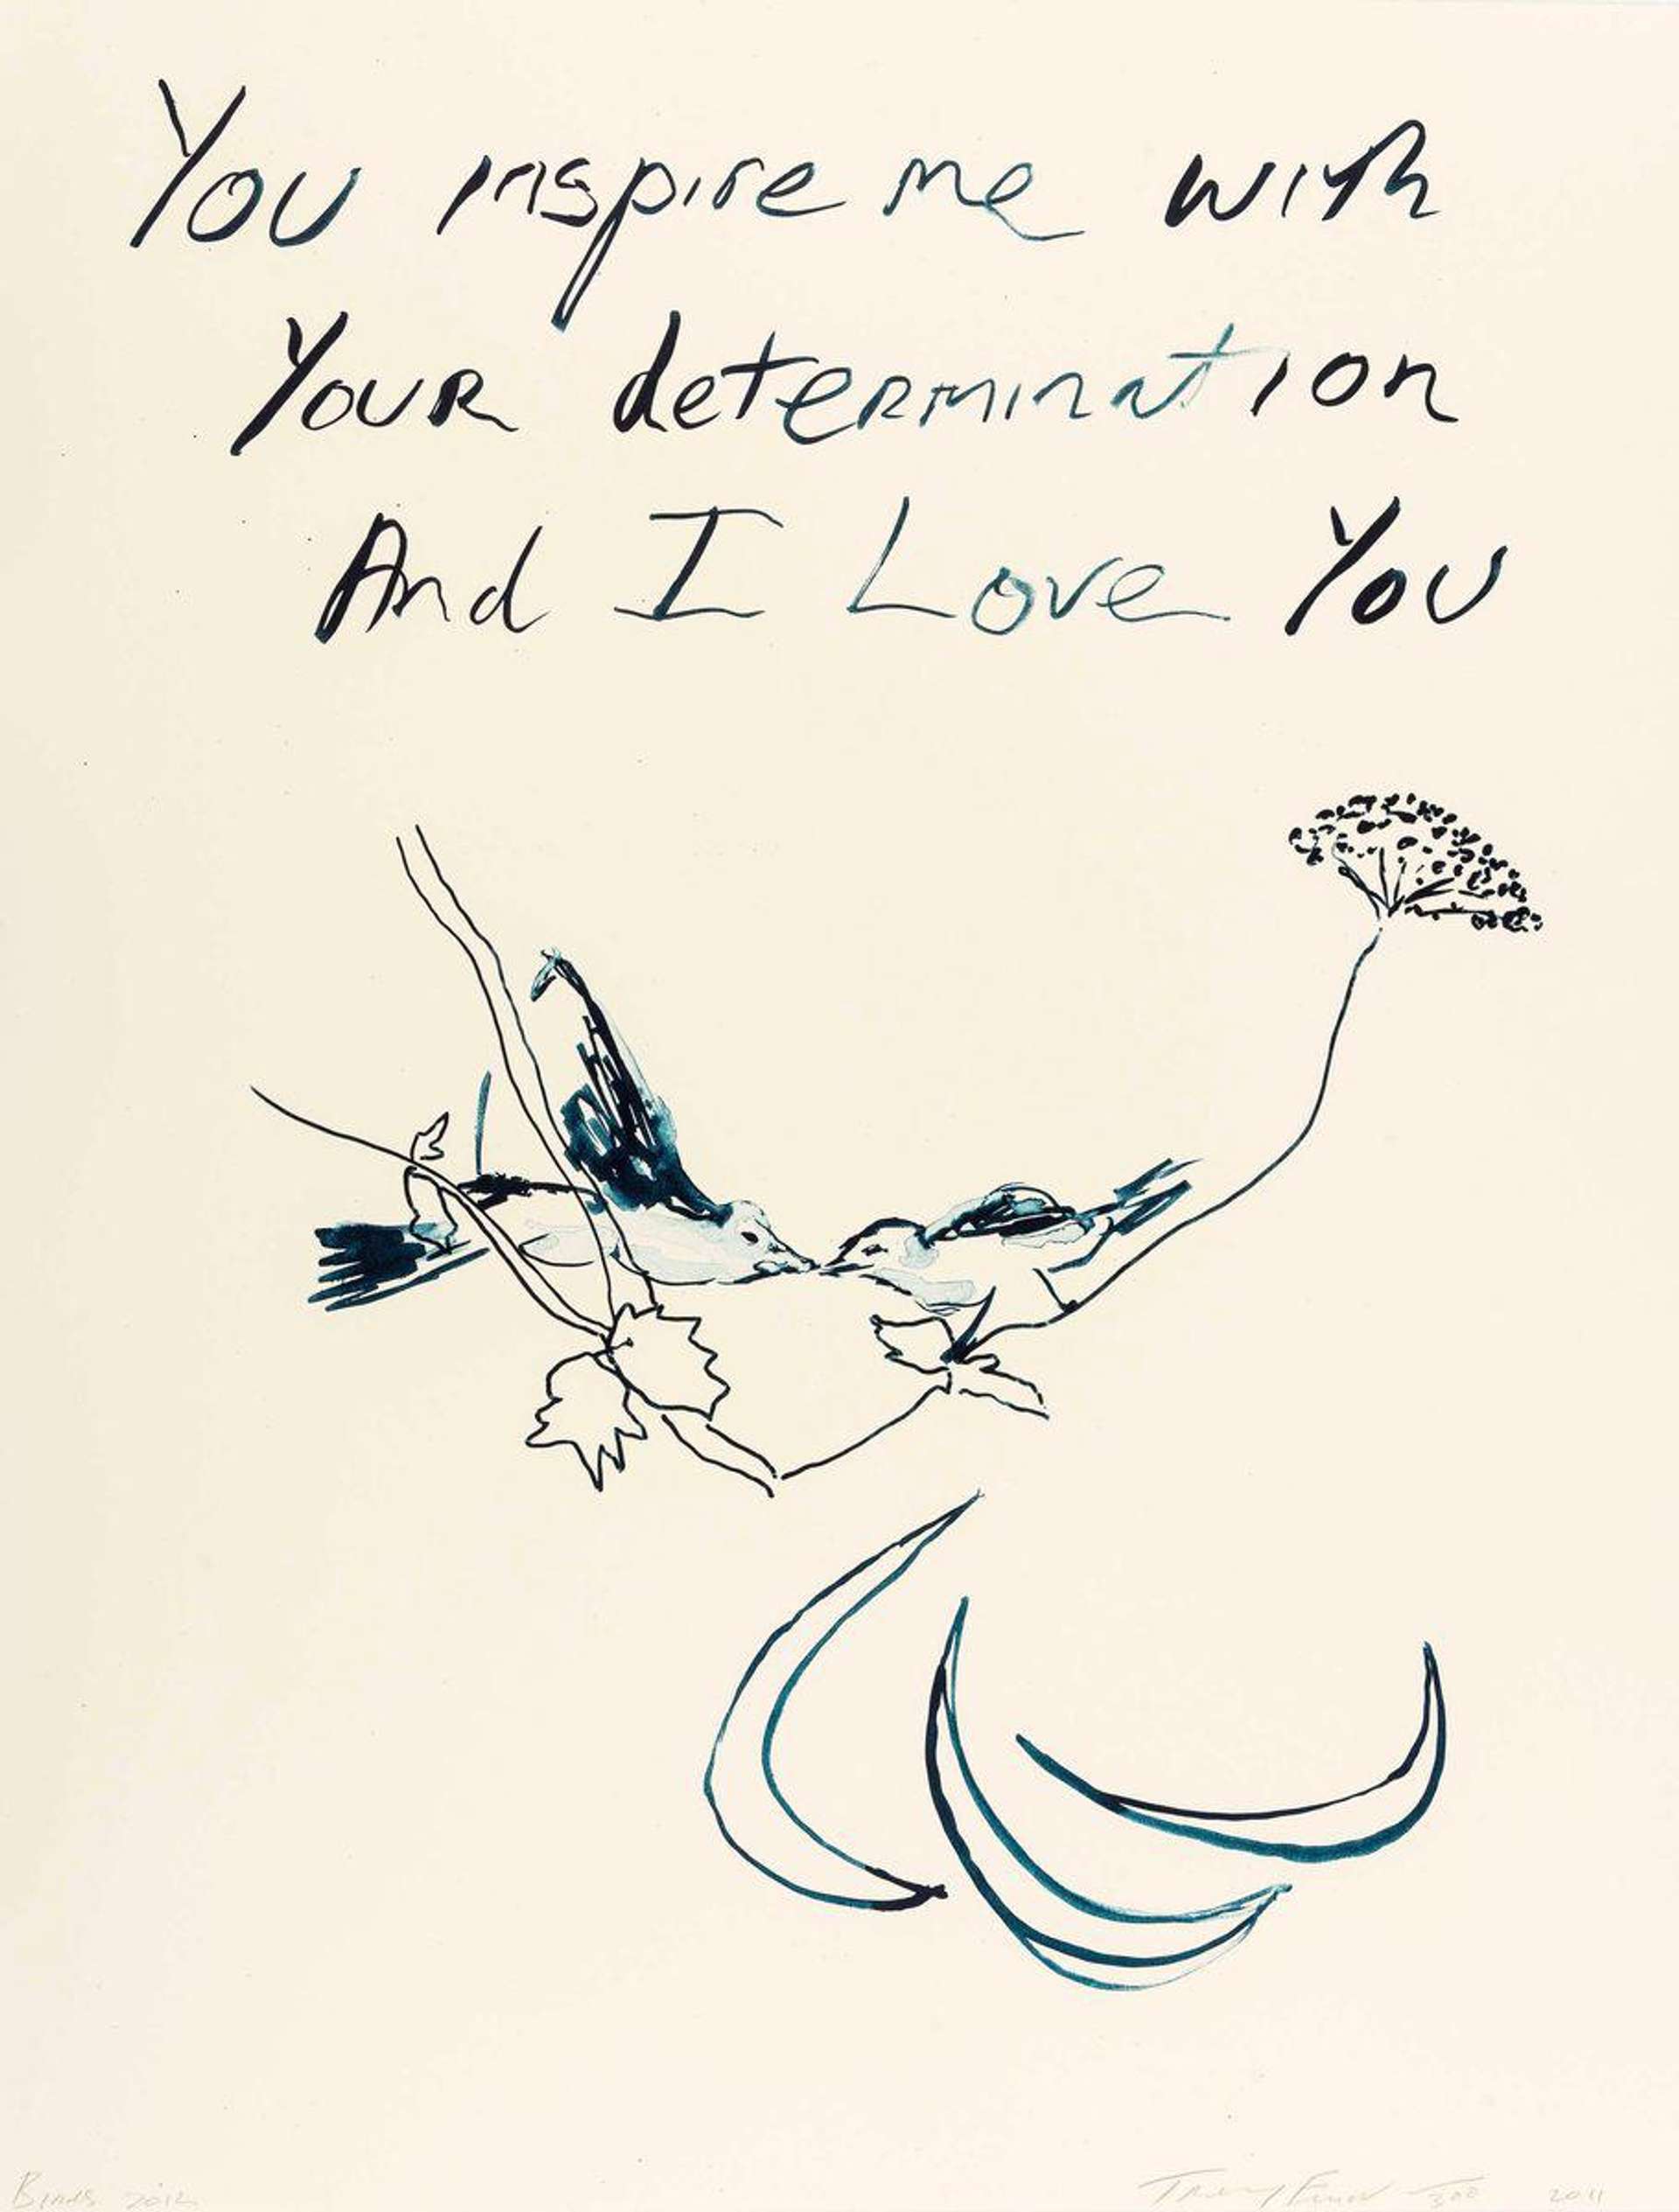 A painting by Tracey Emin that reads "You Inspire Me And I Love You" above a scene of birds and flowers in navy blue against a white background. 